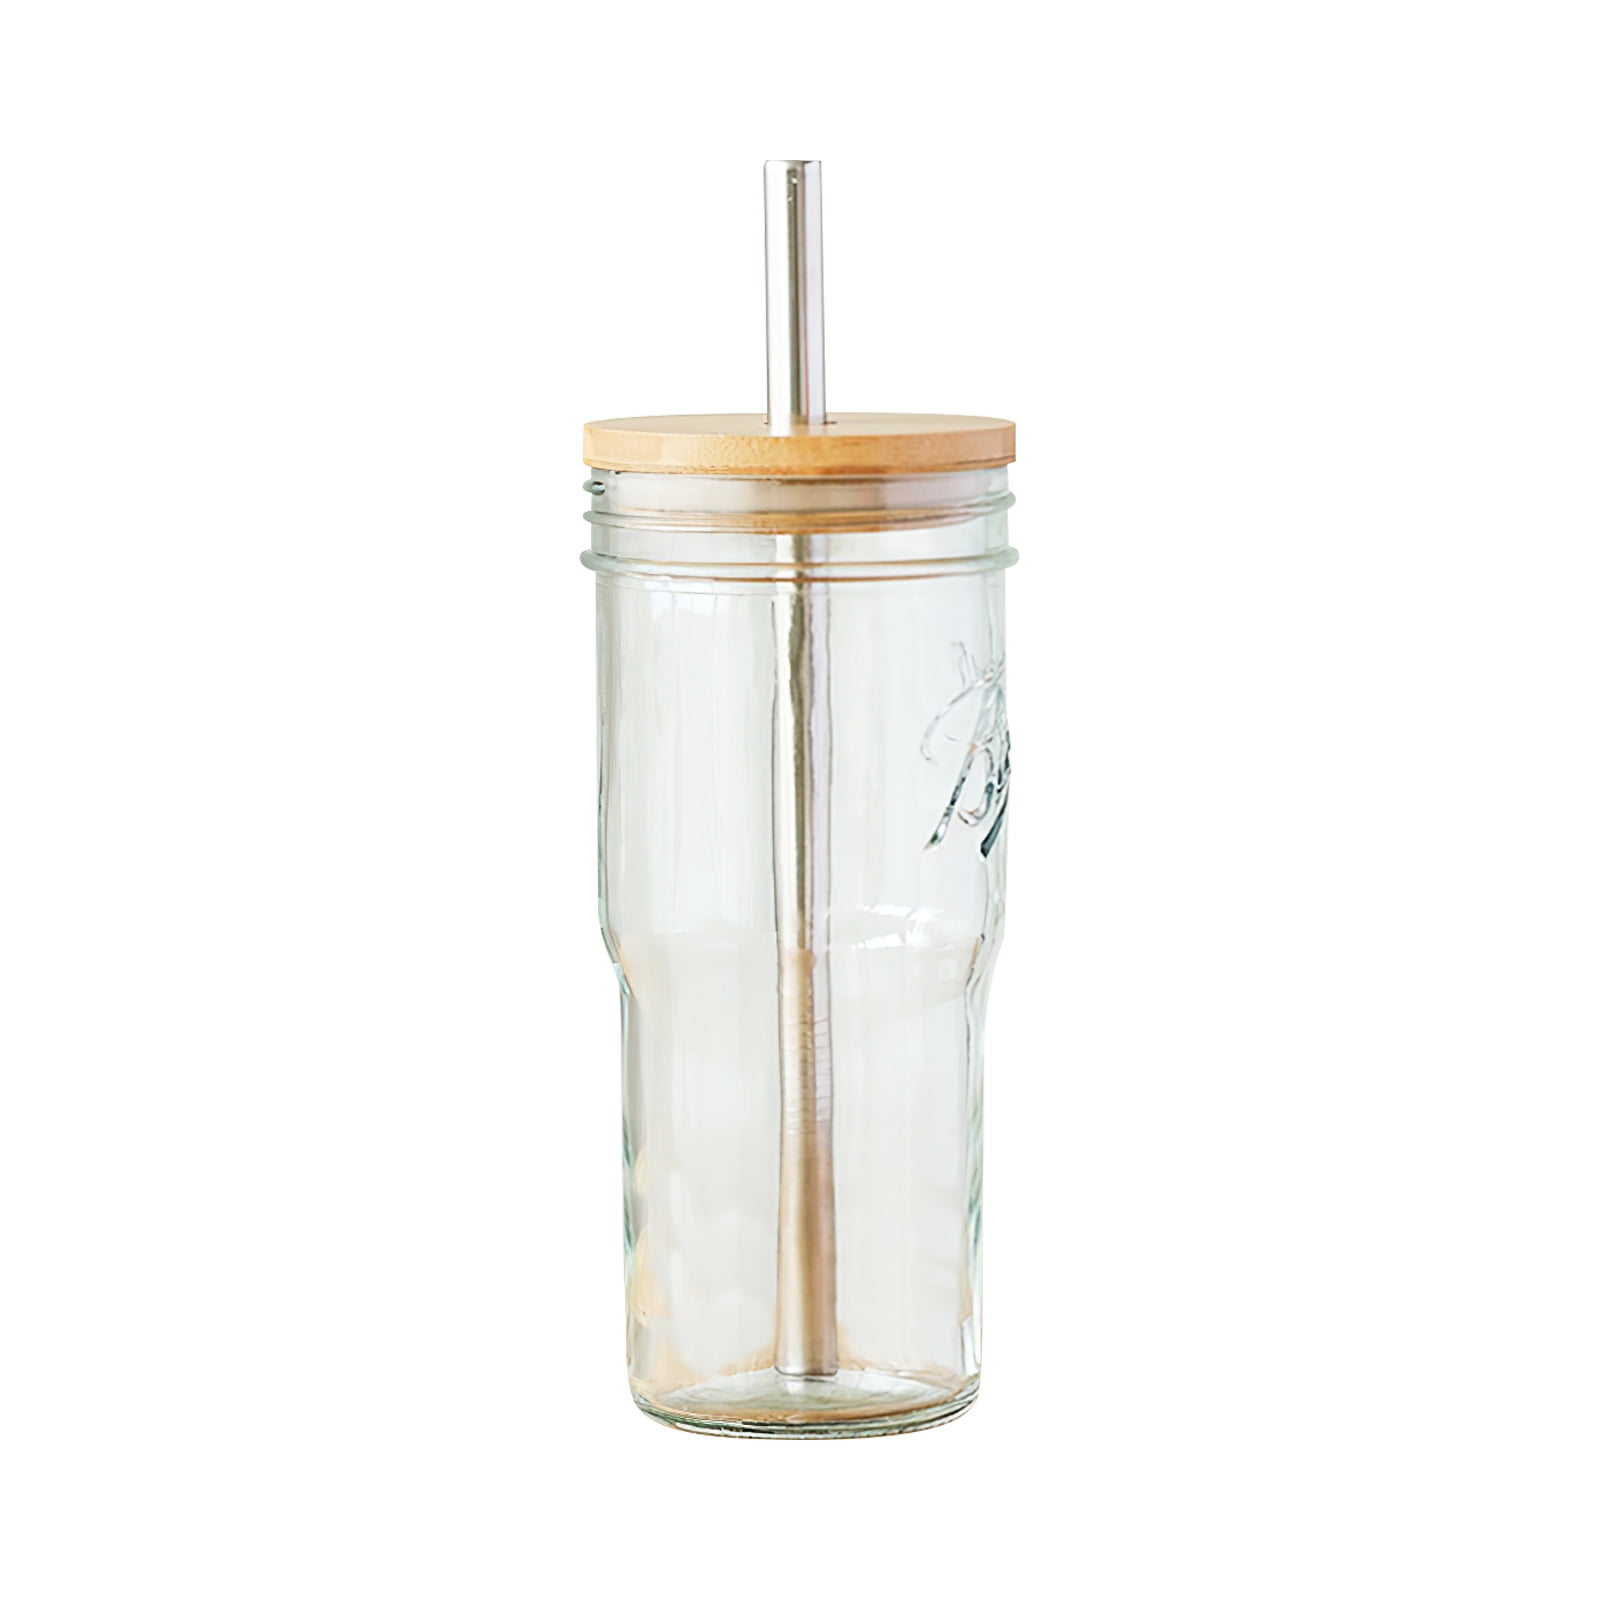 2 packs Mason Jar Cups with Bamboo Lids and Black Stainless Steel Straws 24  OZ Mason Jar Mugs with Handle Regular Mouth Mason Jars Drinking Clear  Glasses Coffee Cups with Lids(Black Straw)